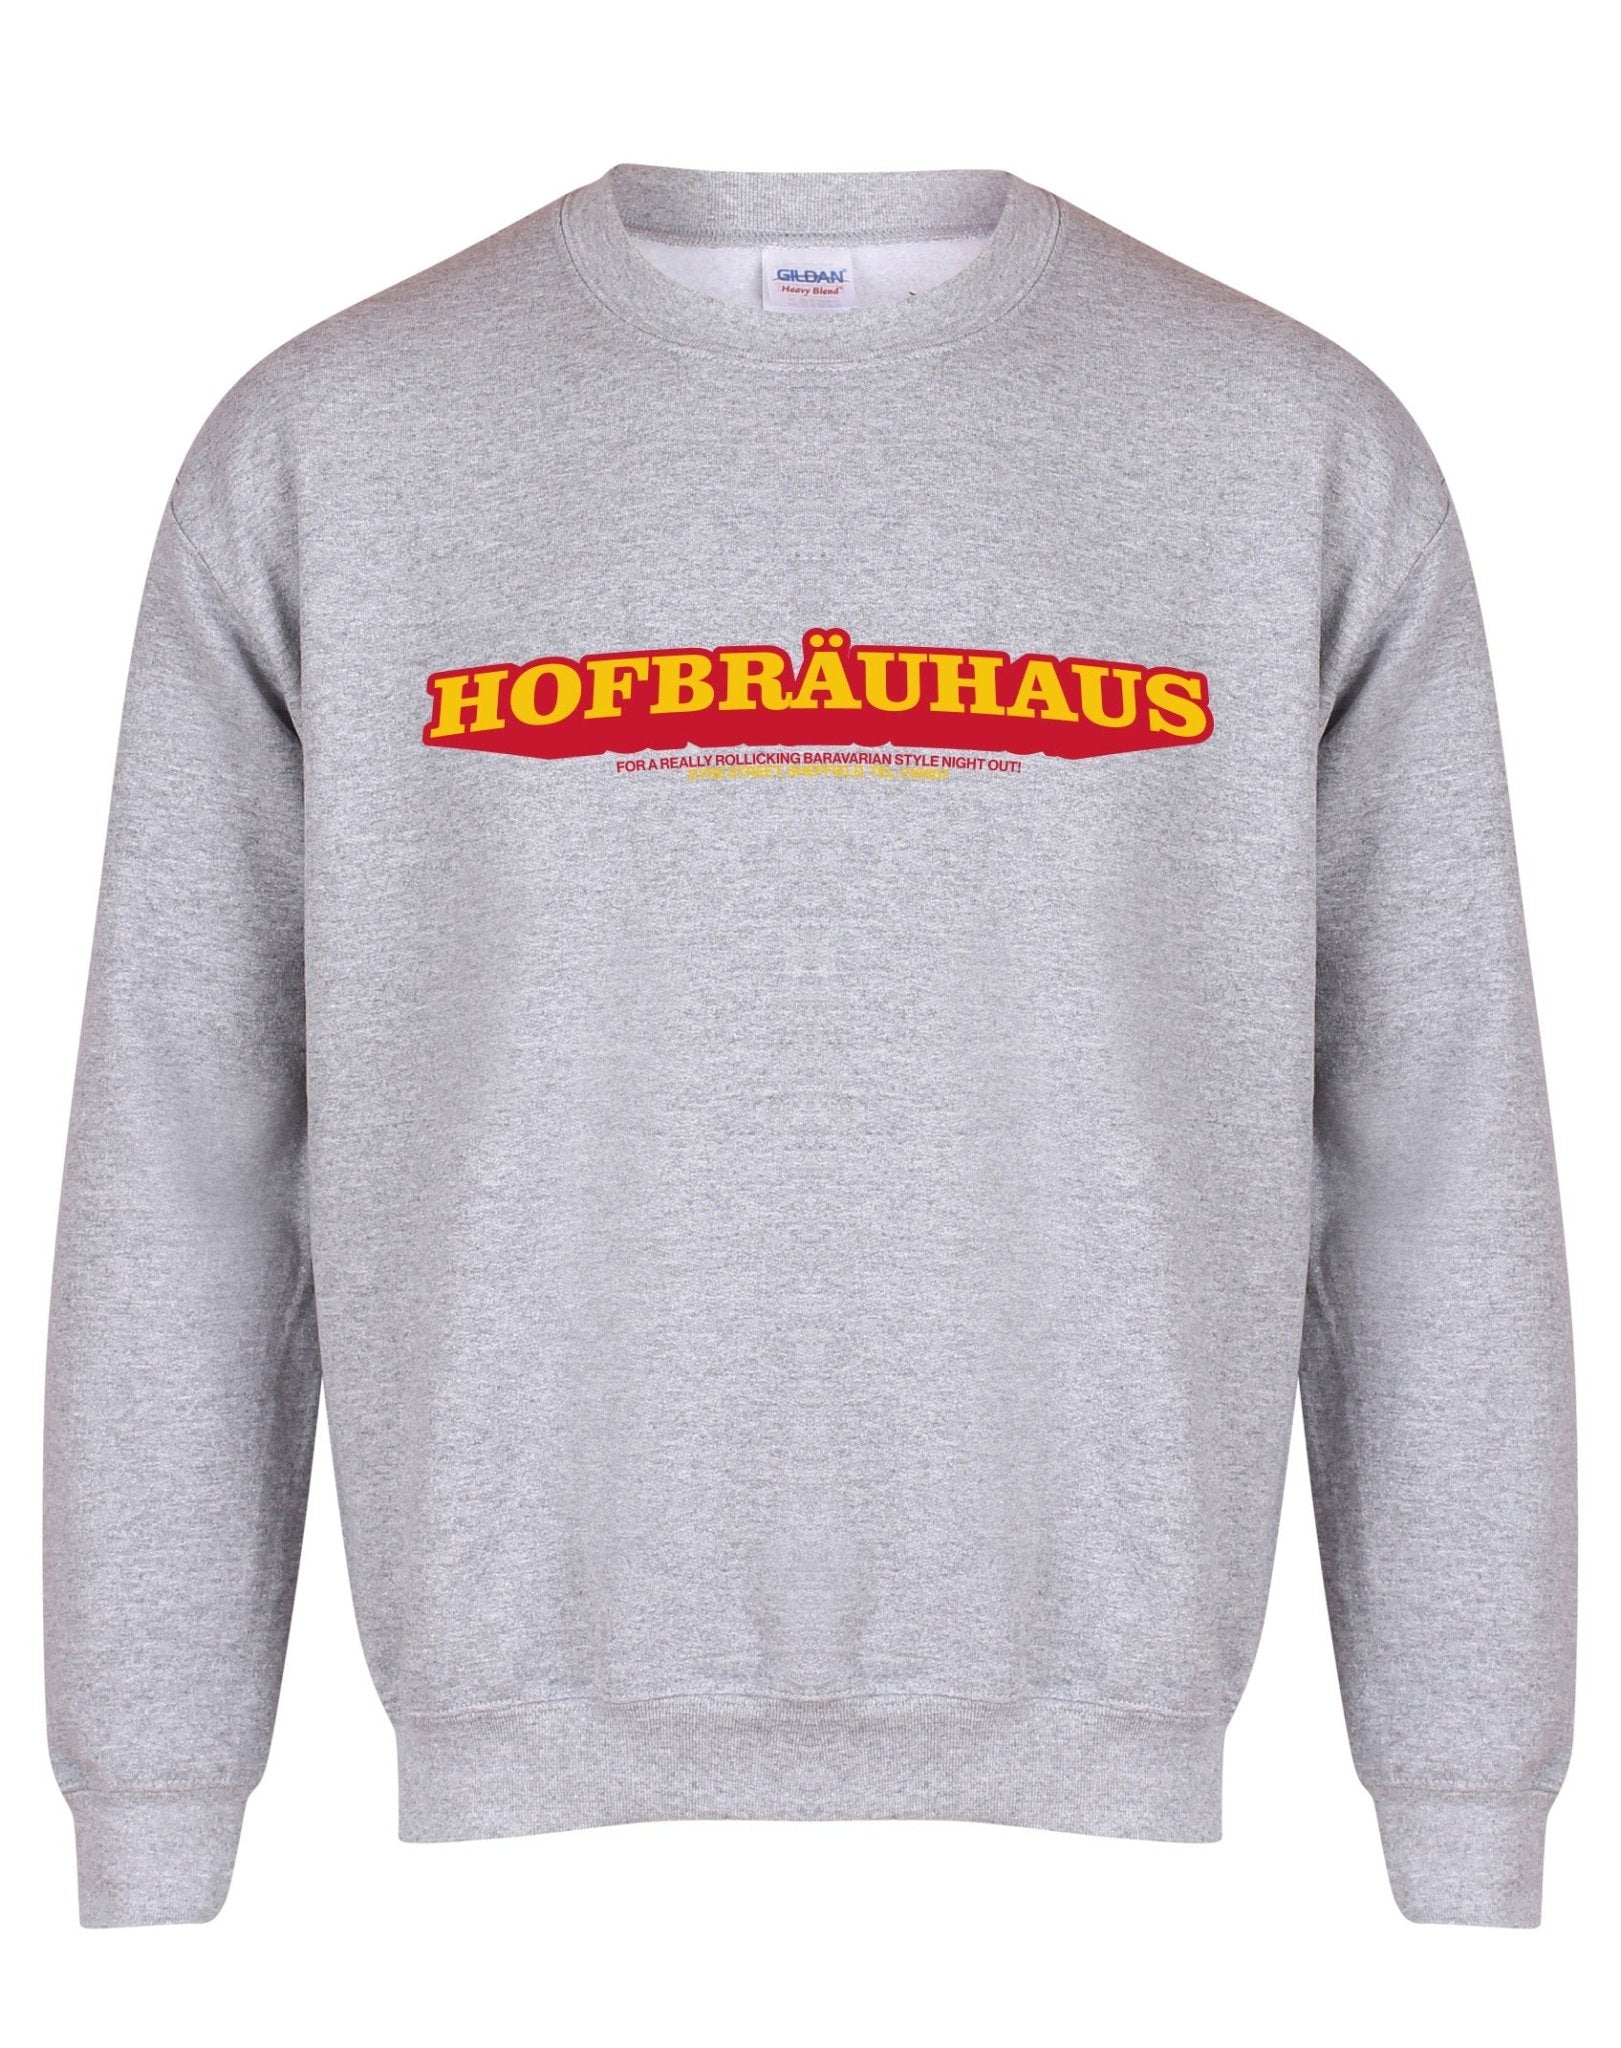 Hofbräuhaus unisex sweatshirt - various colours - Dirty Stop Outs